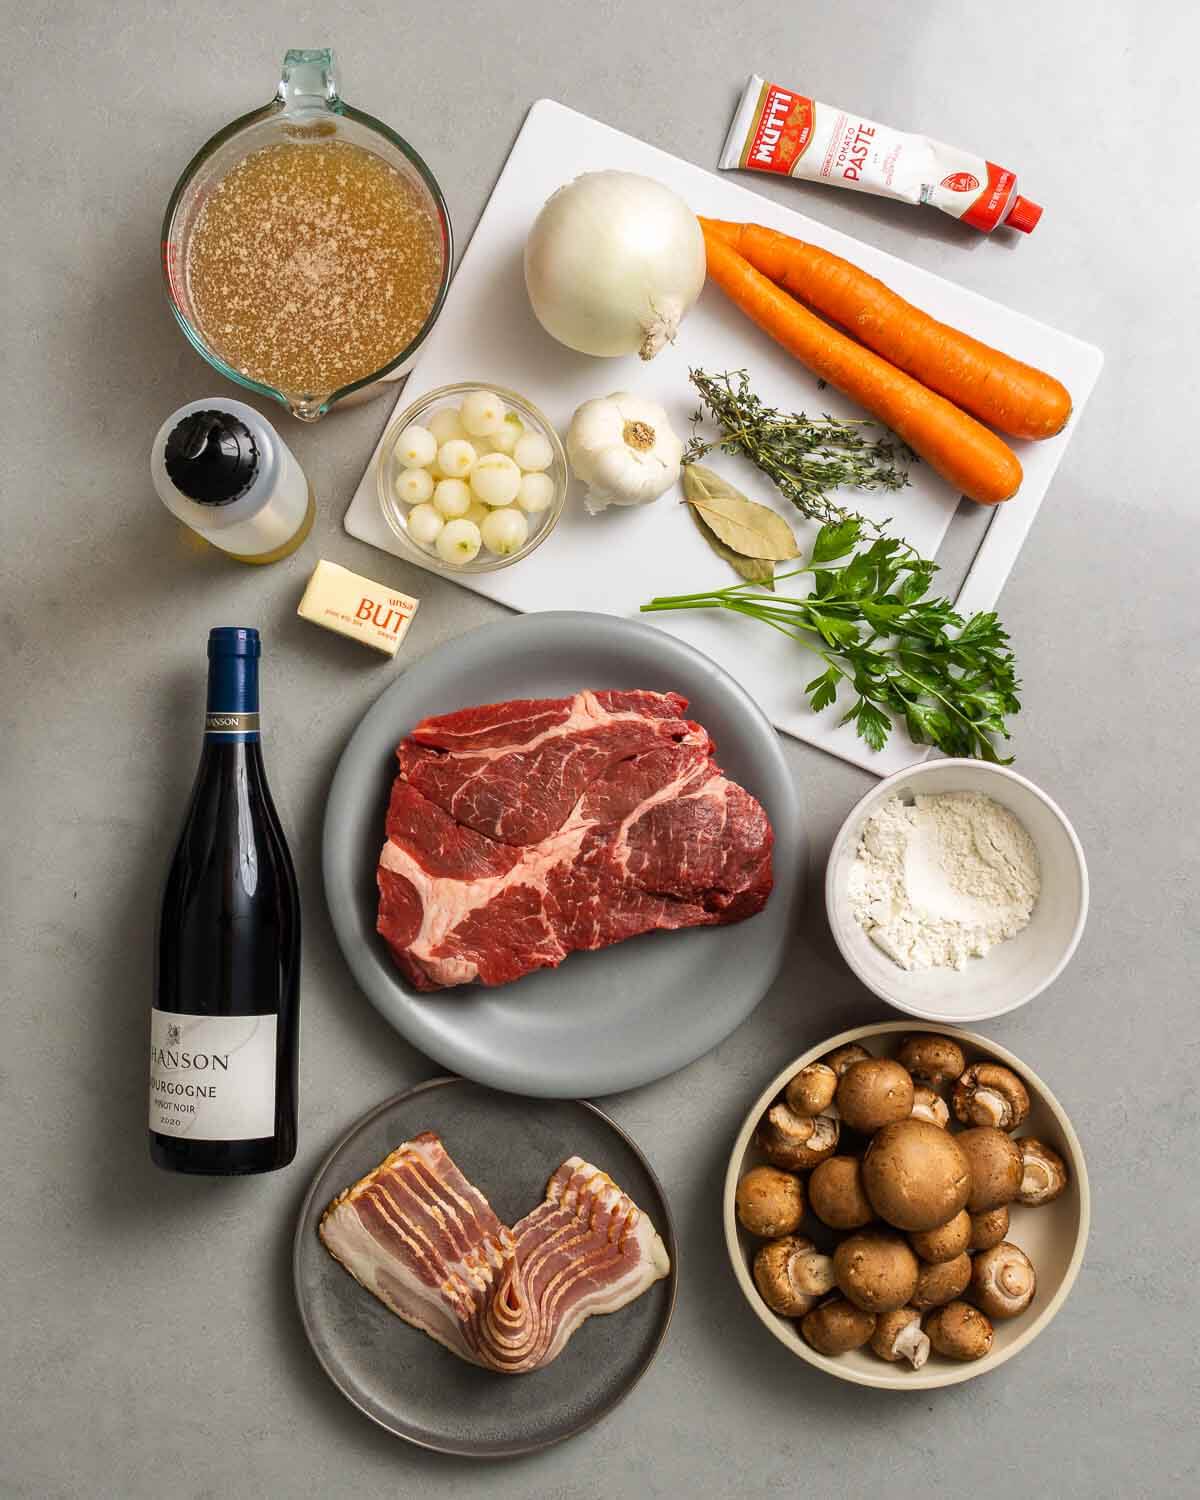 Ingredients shown: beef stock, olive oil, butter, pearl onions, garlic, onion, thyme, bay leaves, parsley, carrots, tomato paste, Burgundy wine, beef, bacon, flour, and mushrooms.